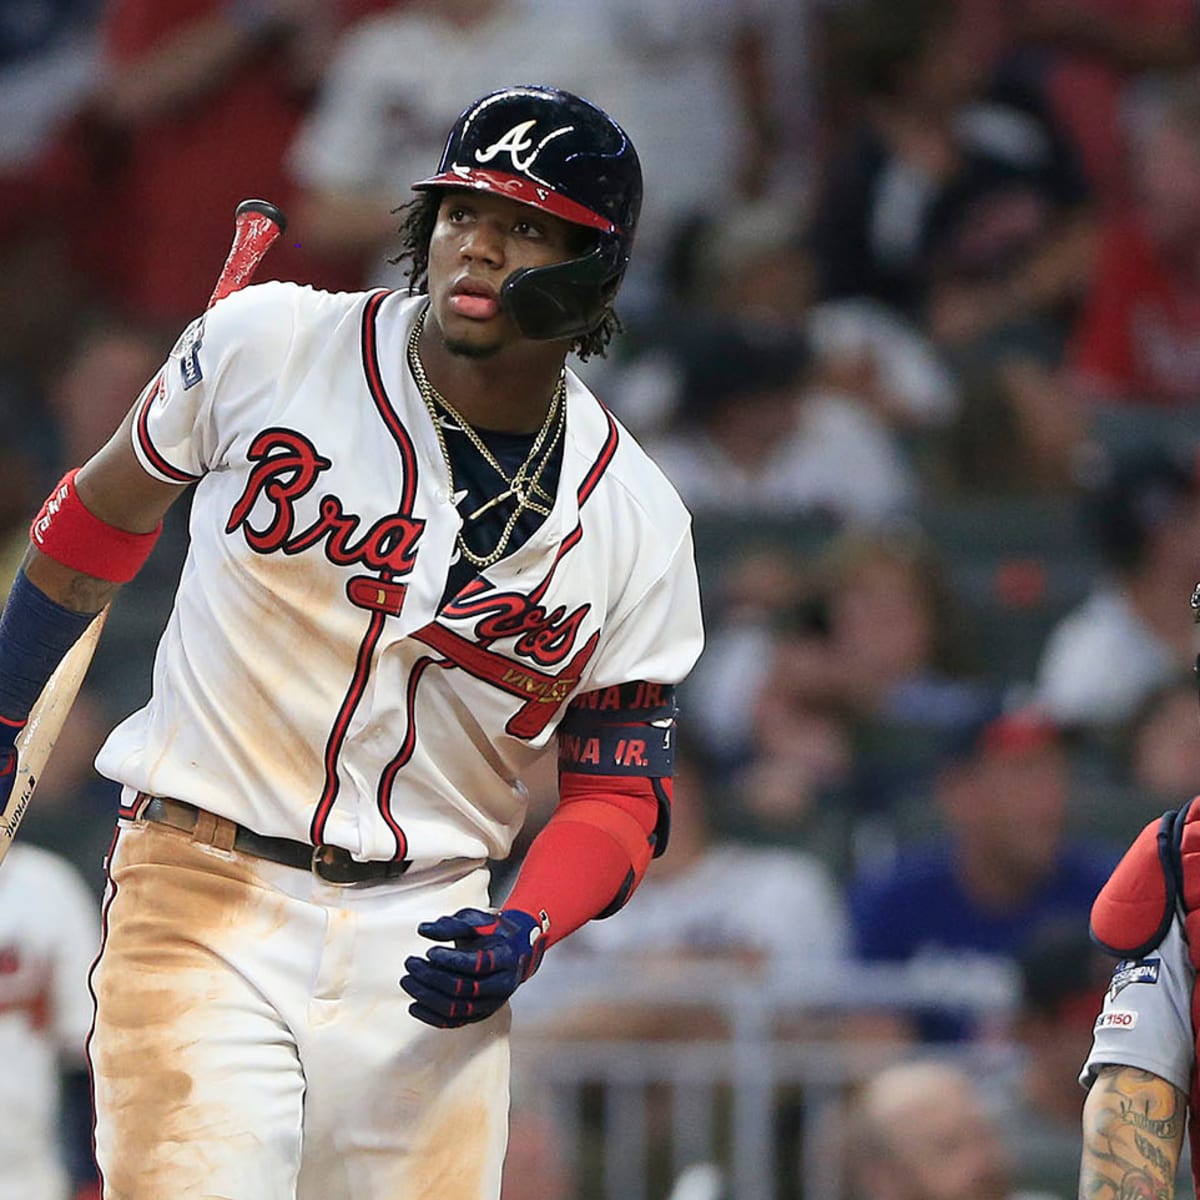 Braves critical of Ronald Acuna Jr's lack of hustle in loss